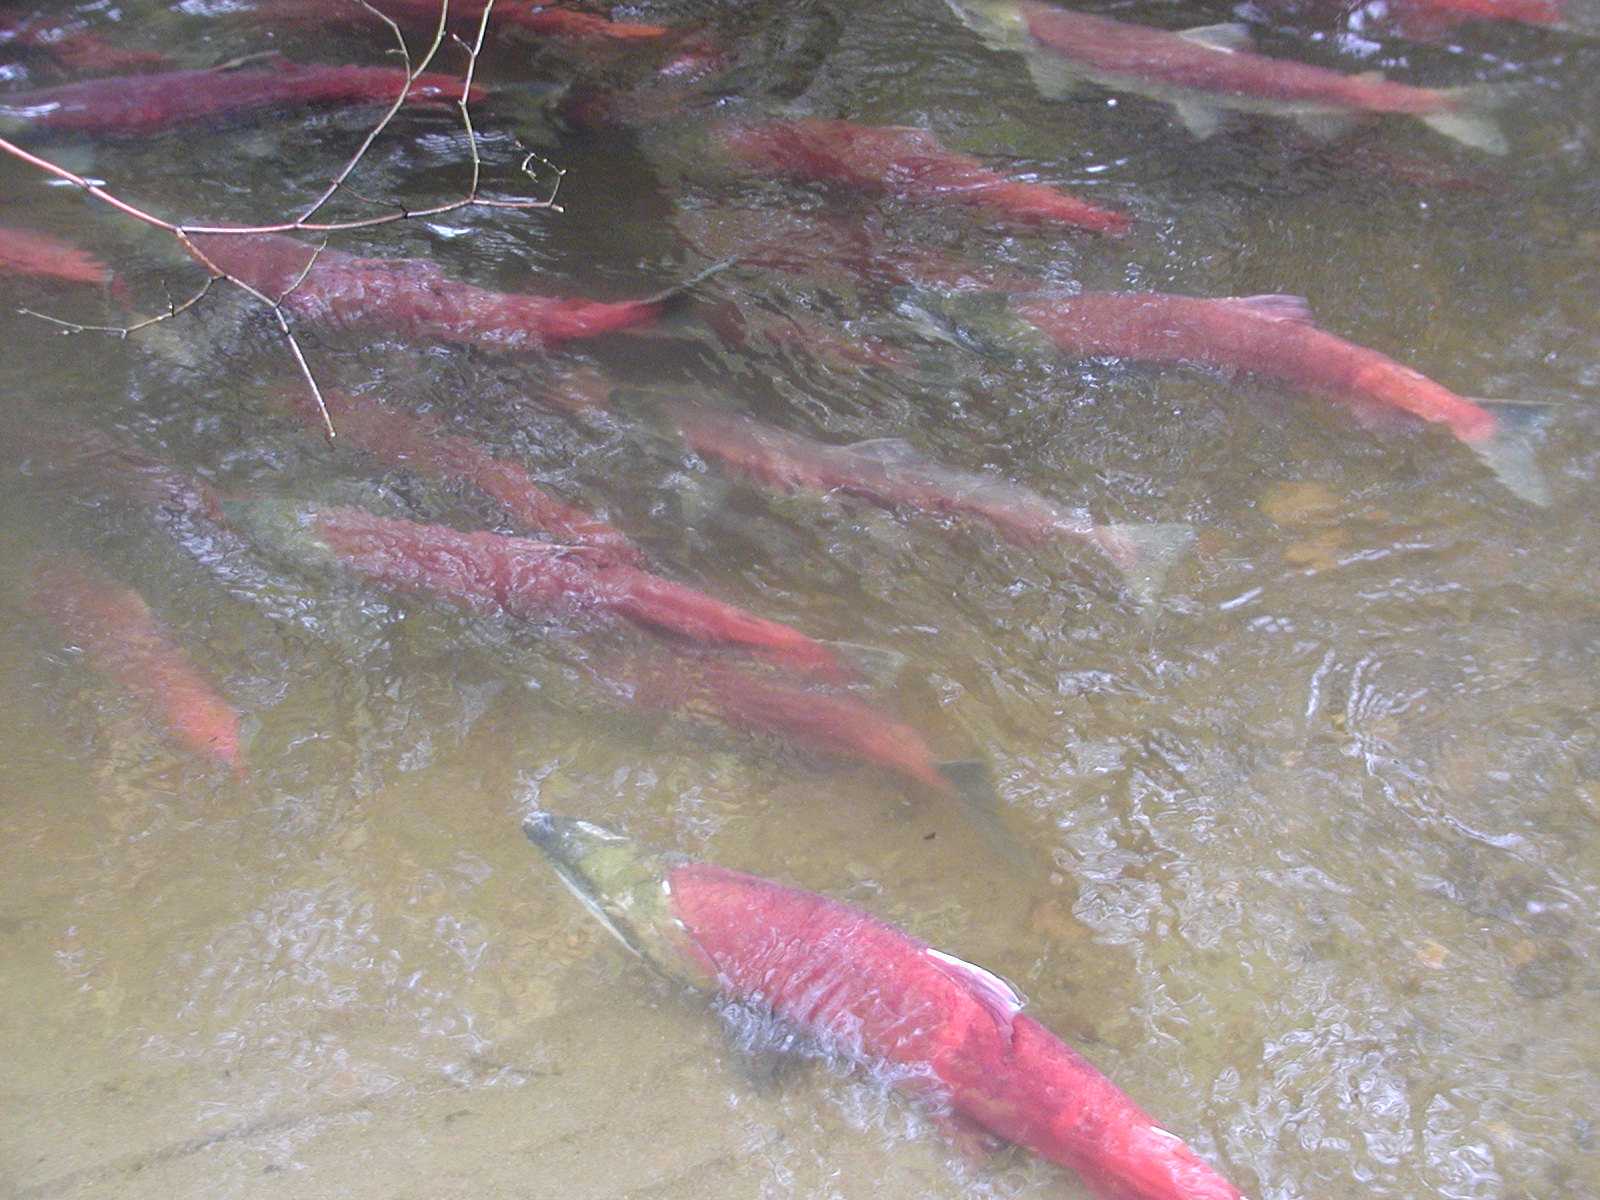 Salmon Viewing in the Greenway